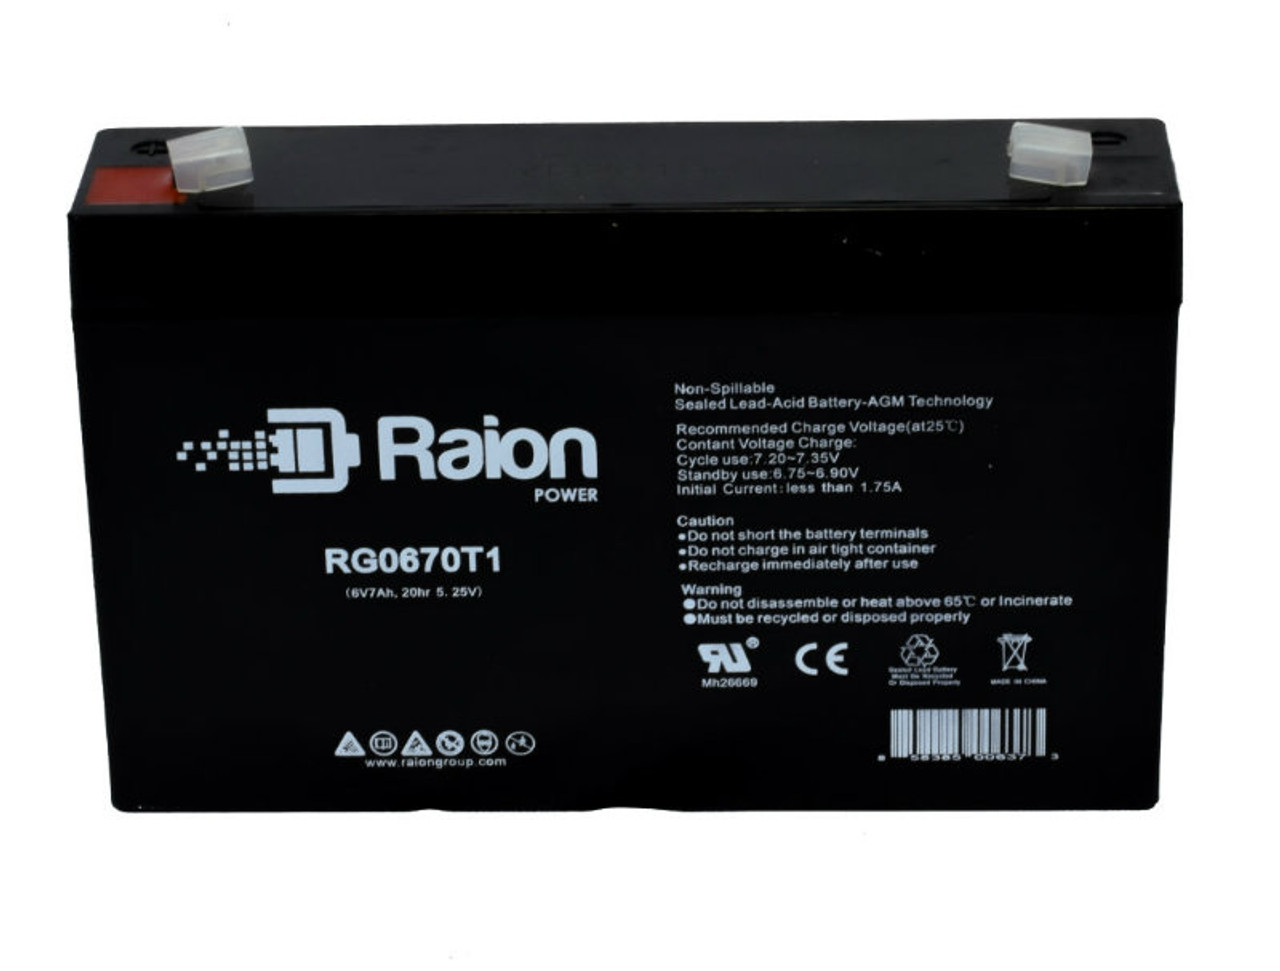 Raion Power RG0670T1 Replacement Battery Cartridge for Kid Motorz 1215 Motorcycle Blue